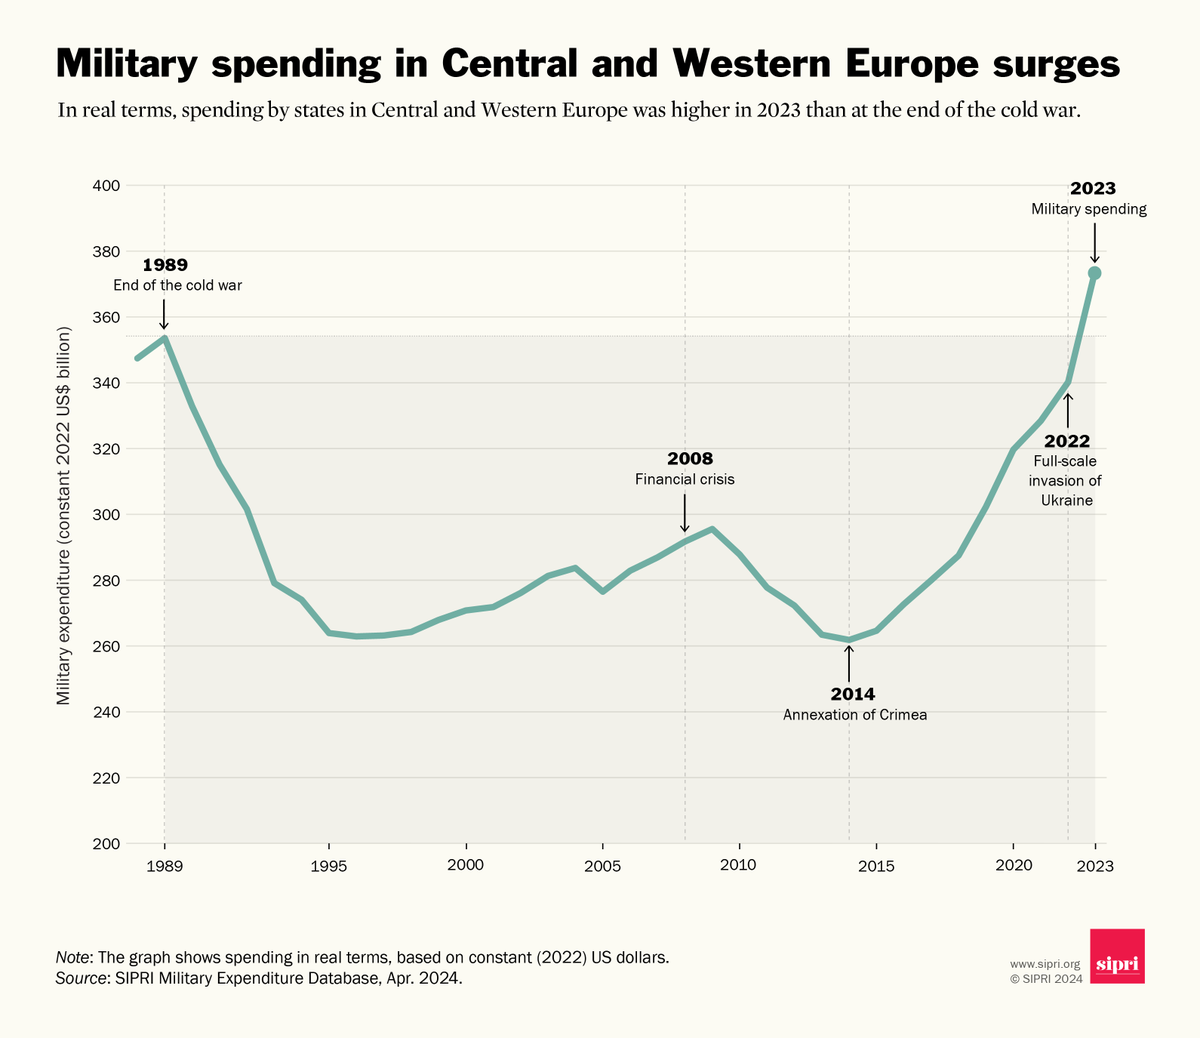 In real terms, #MilitarySpending by states in Central and Western Europe was higher in 2023 than at the end of the #ColdWar.

Fact Sheet ➡️ doi.org/10.55163/BQGA2…